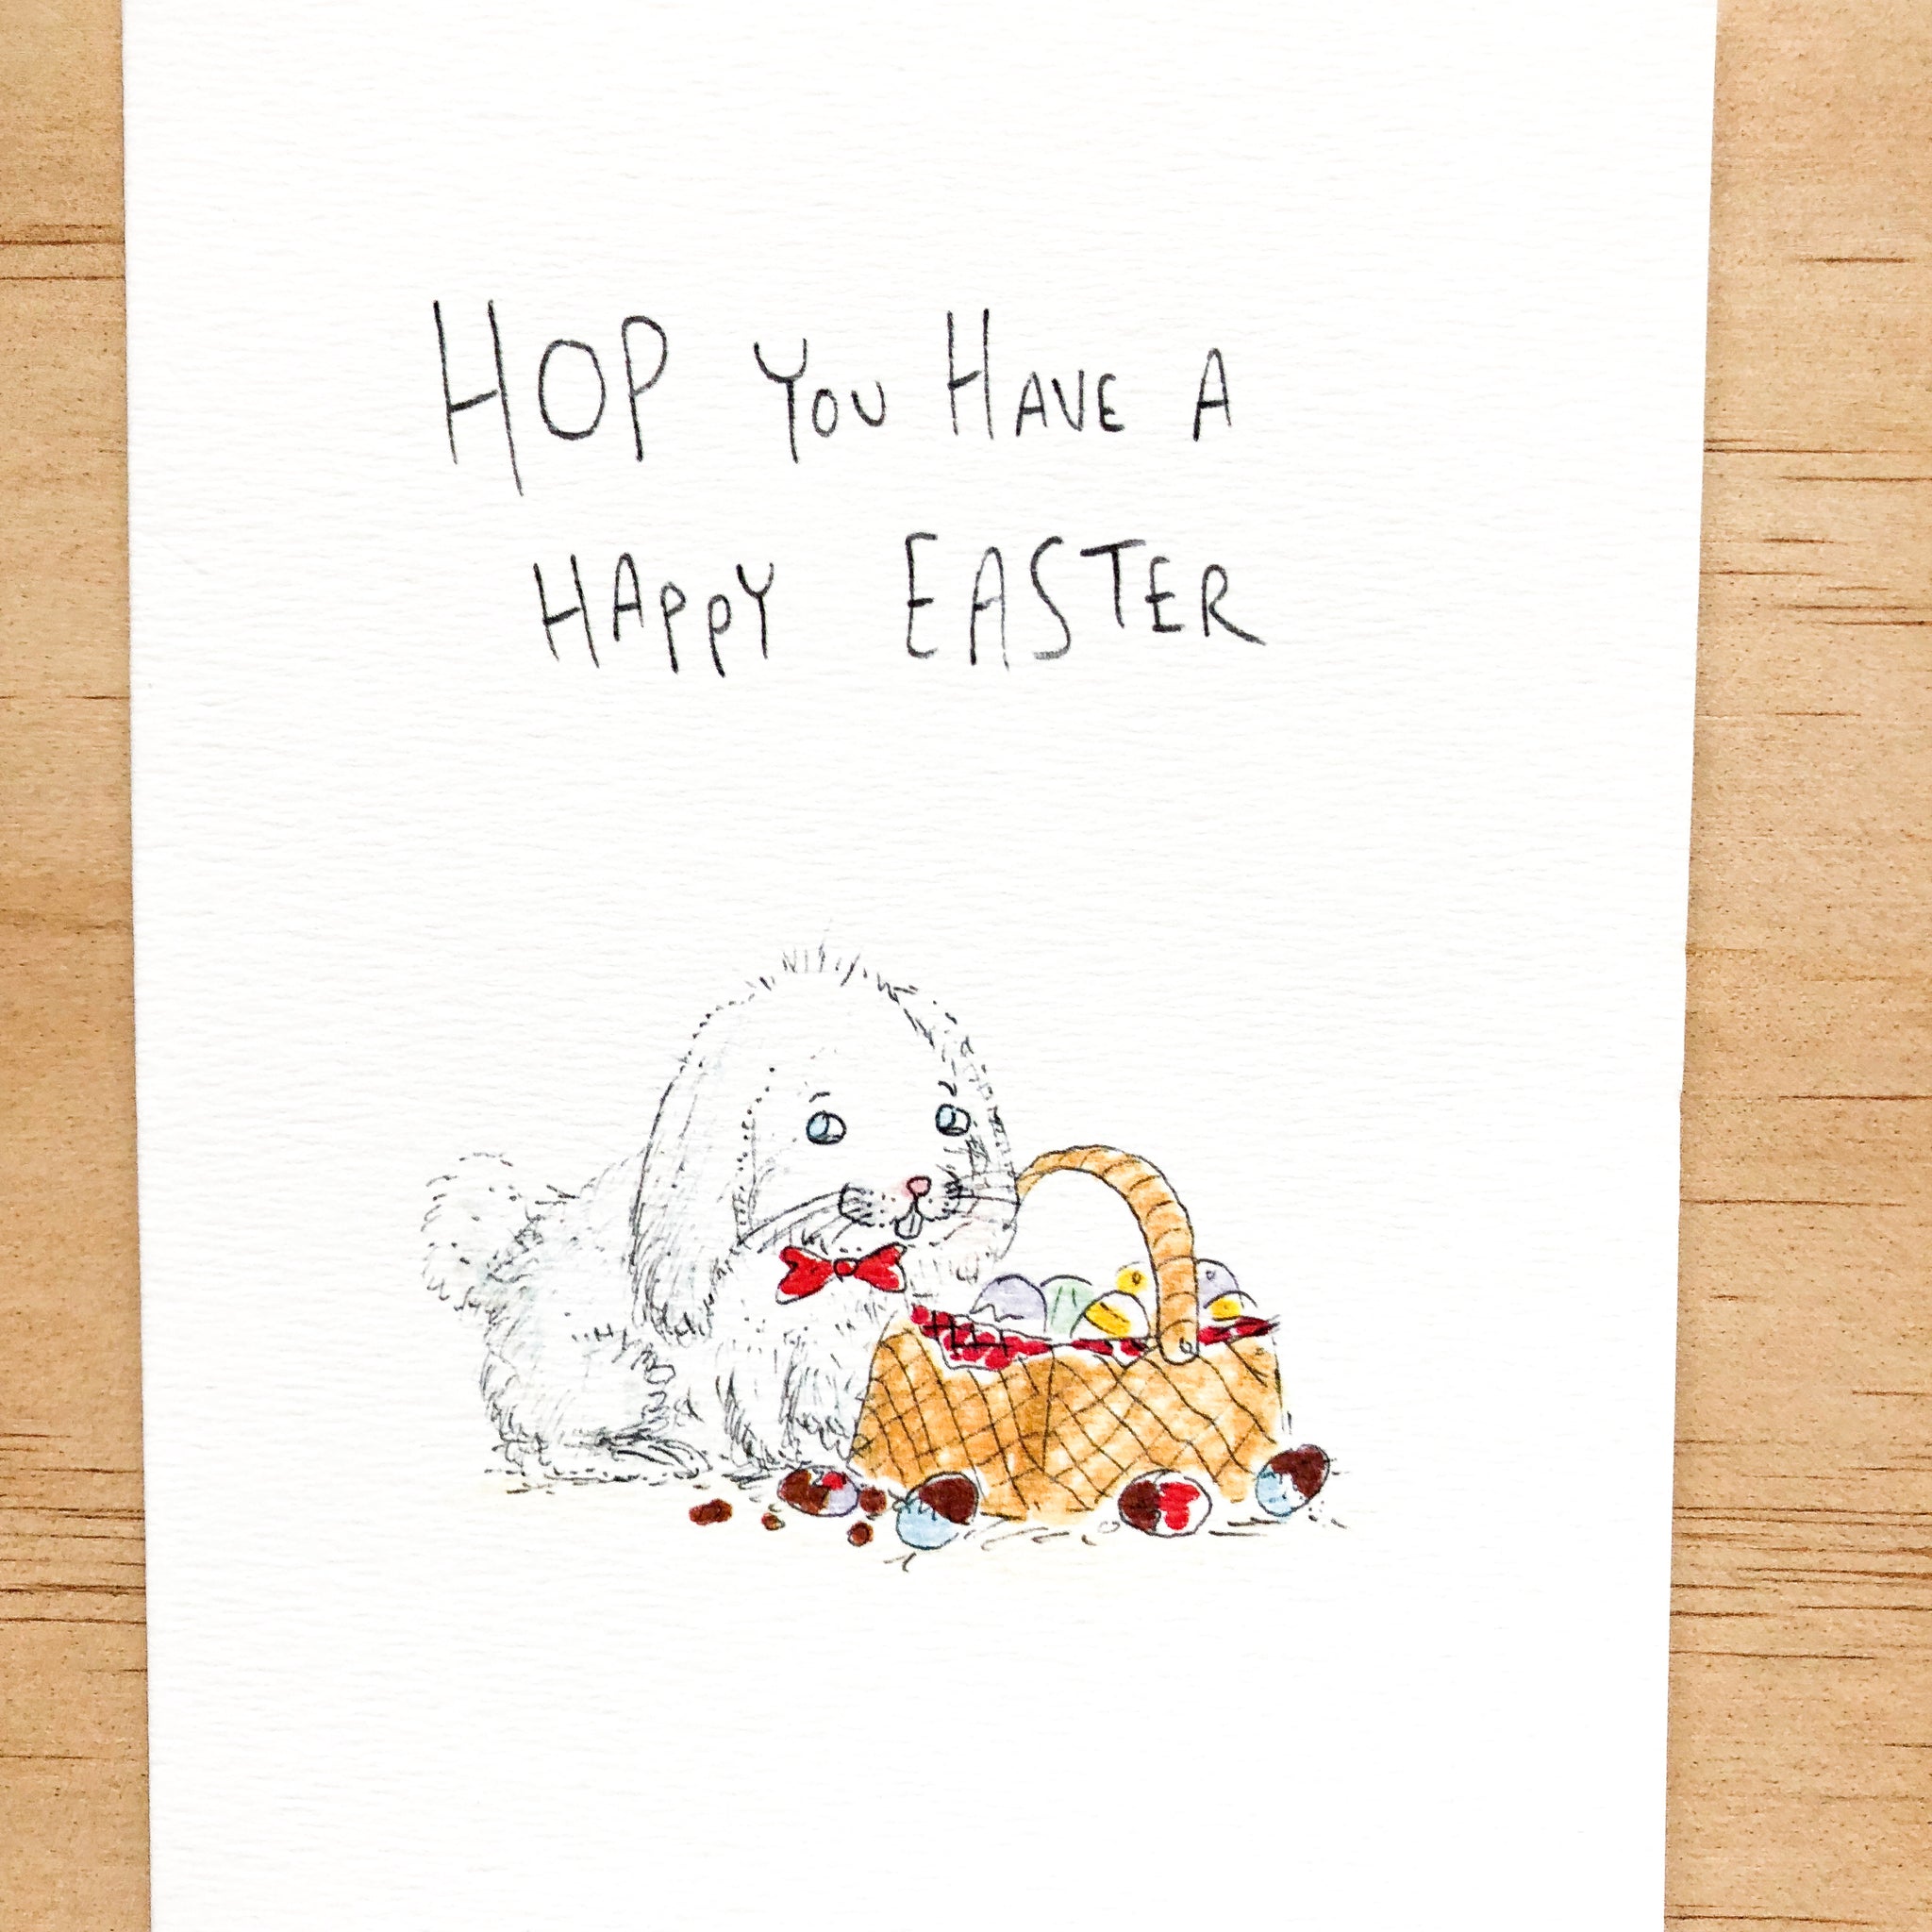 Hop You Have a Happy Easter - Well Drawn